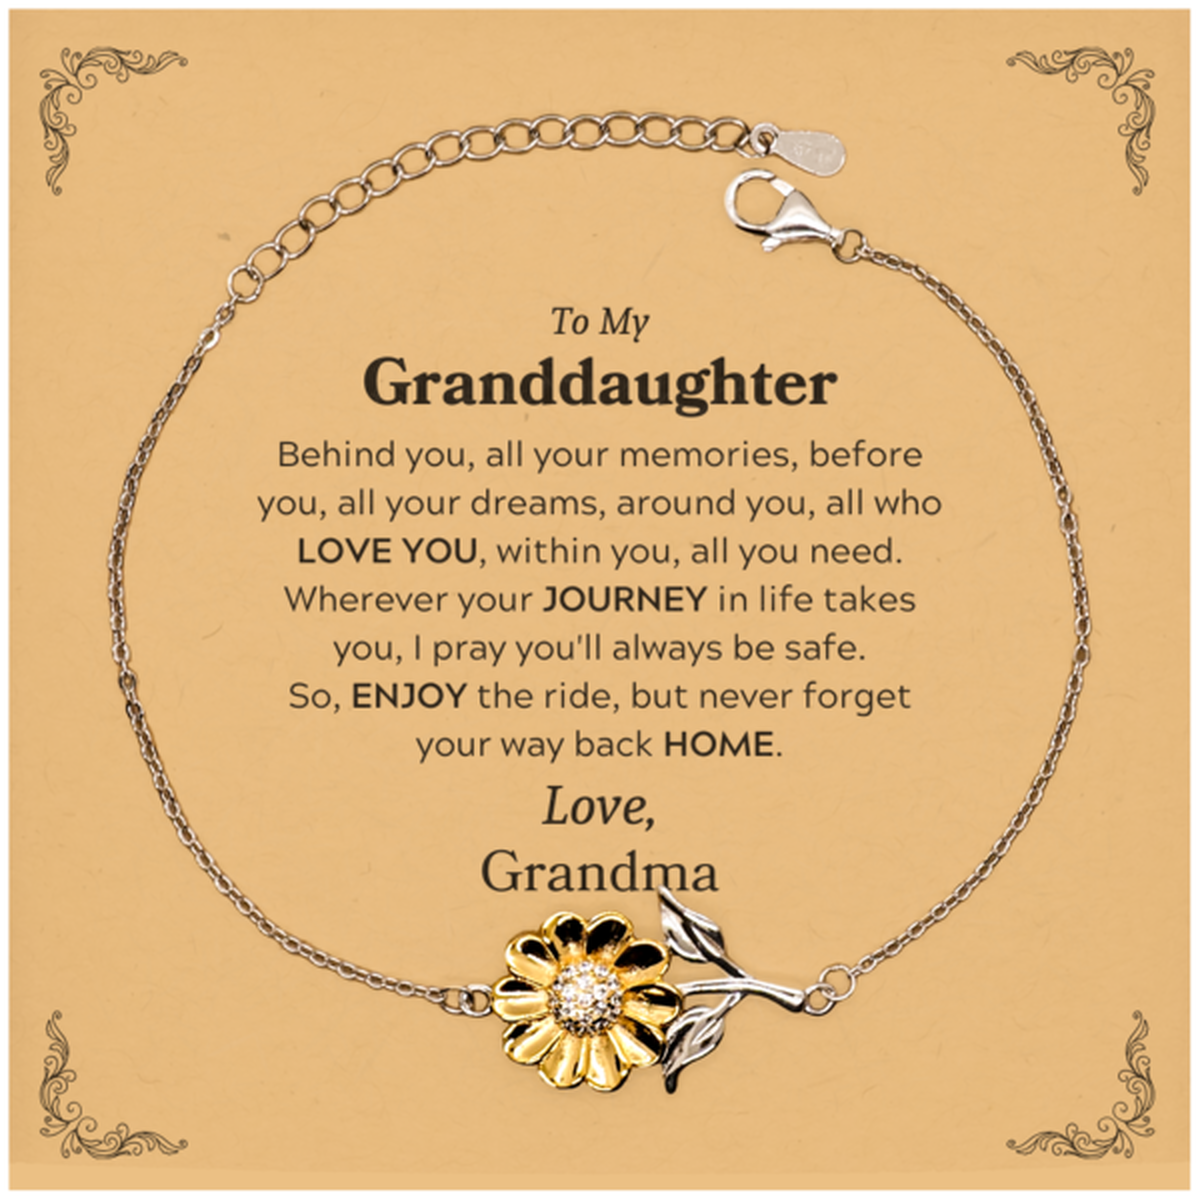 To My Granddaughter Graduation Gifts from Grandma, Granddaughter Sunflower Bracelet Christmas Birthday Gifts for Granddaughter Behind you, all your memories, before you, all your dreams. Love, Grandma